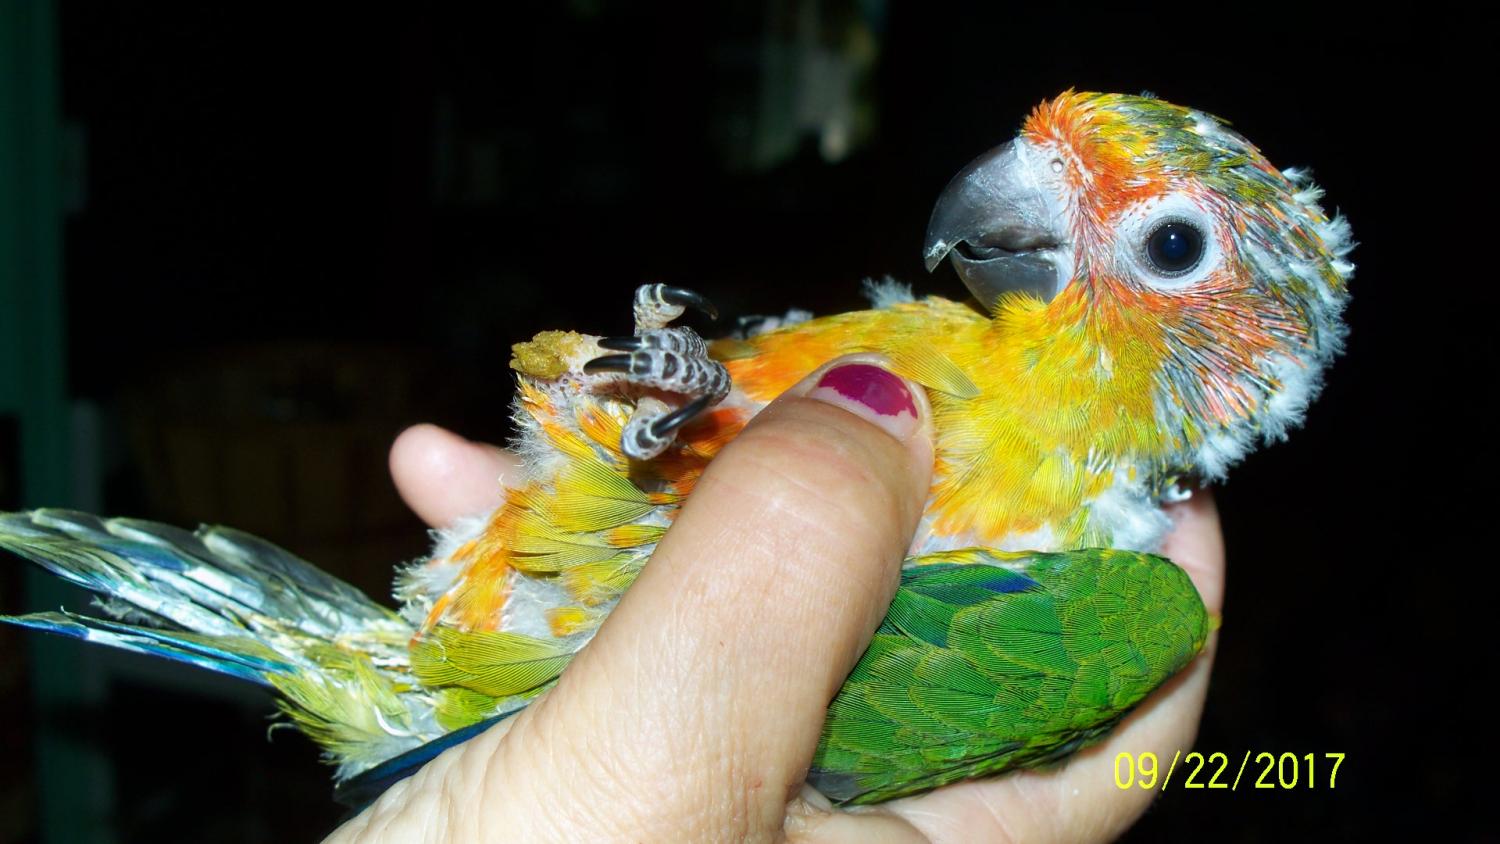 For Sale Handfed Baby Sun Conure Birds For Sale Price,White Sweet Potato Fries